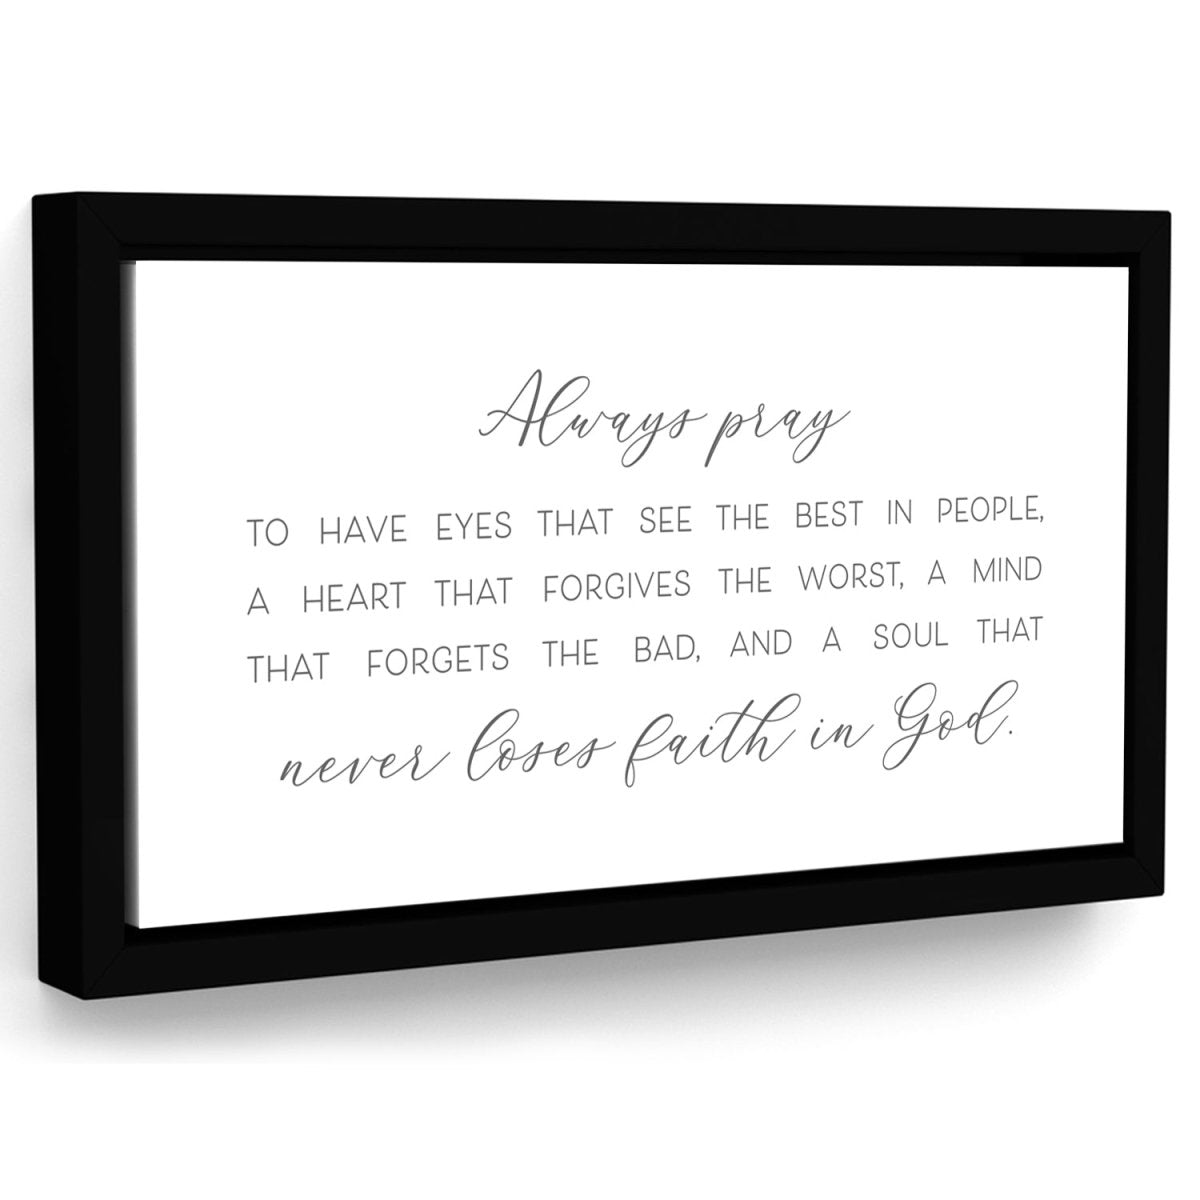 Always Pray To Have Eyes That See The Best In People Canvas Art - Pretty Perfect Studio